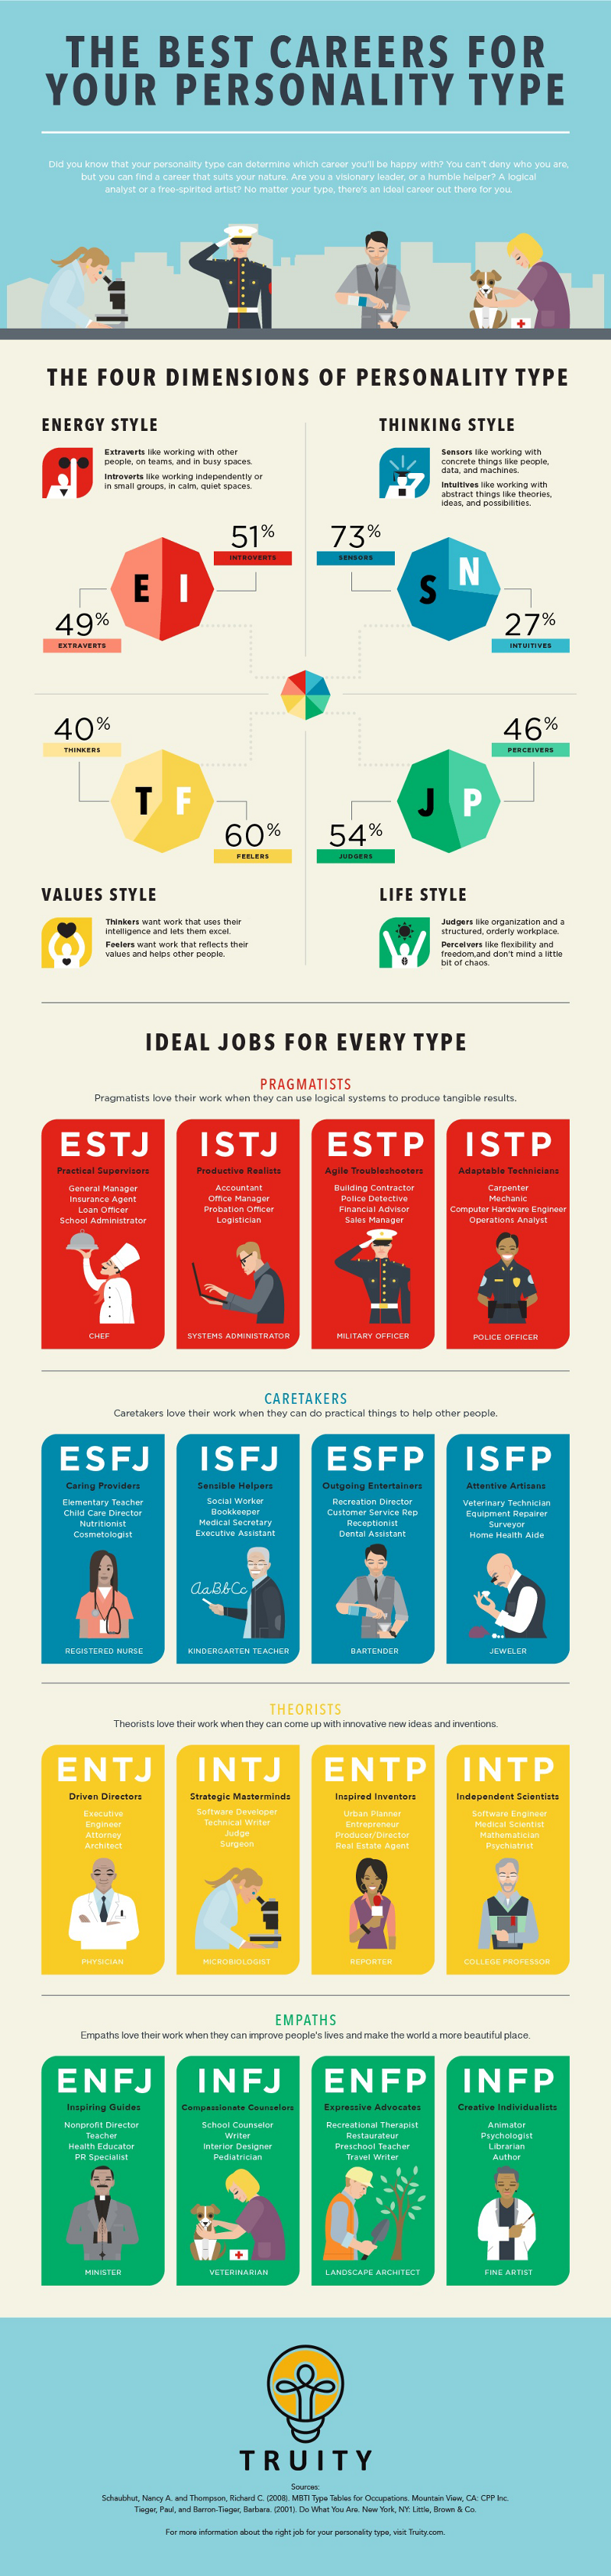 Best career for your personality type